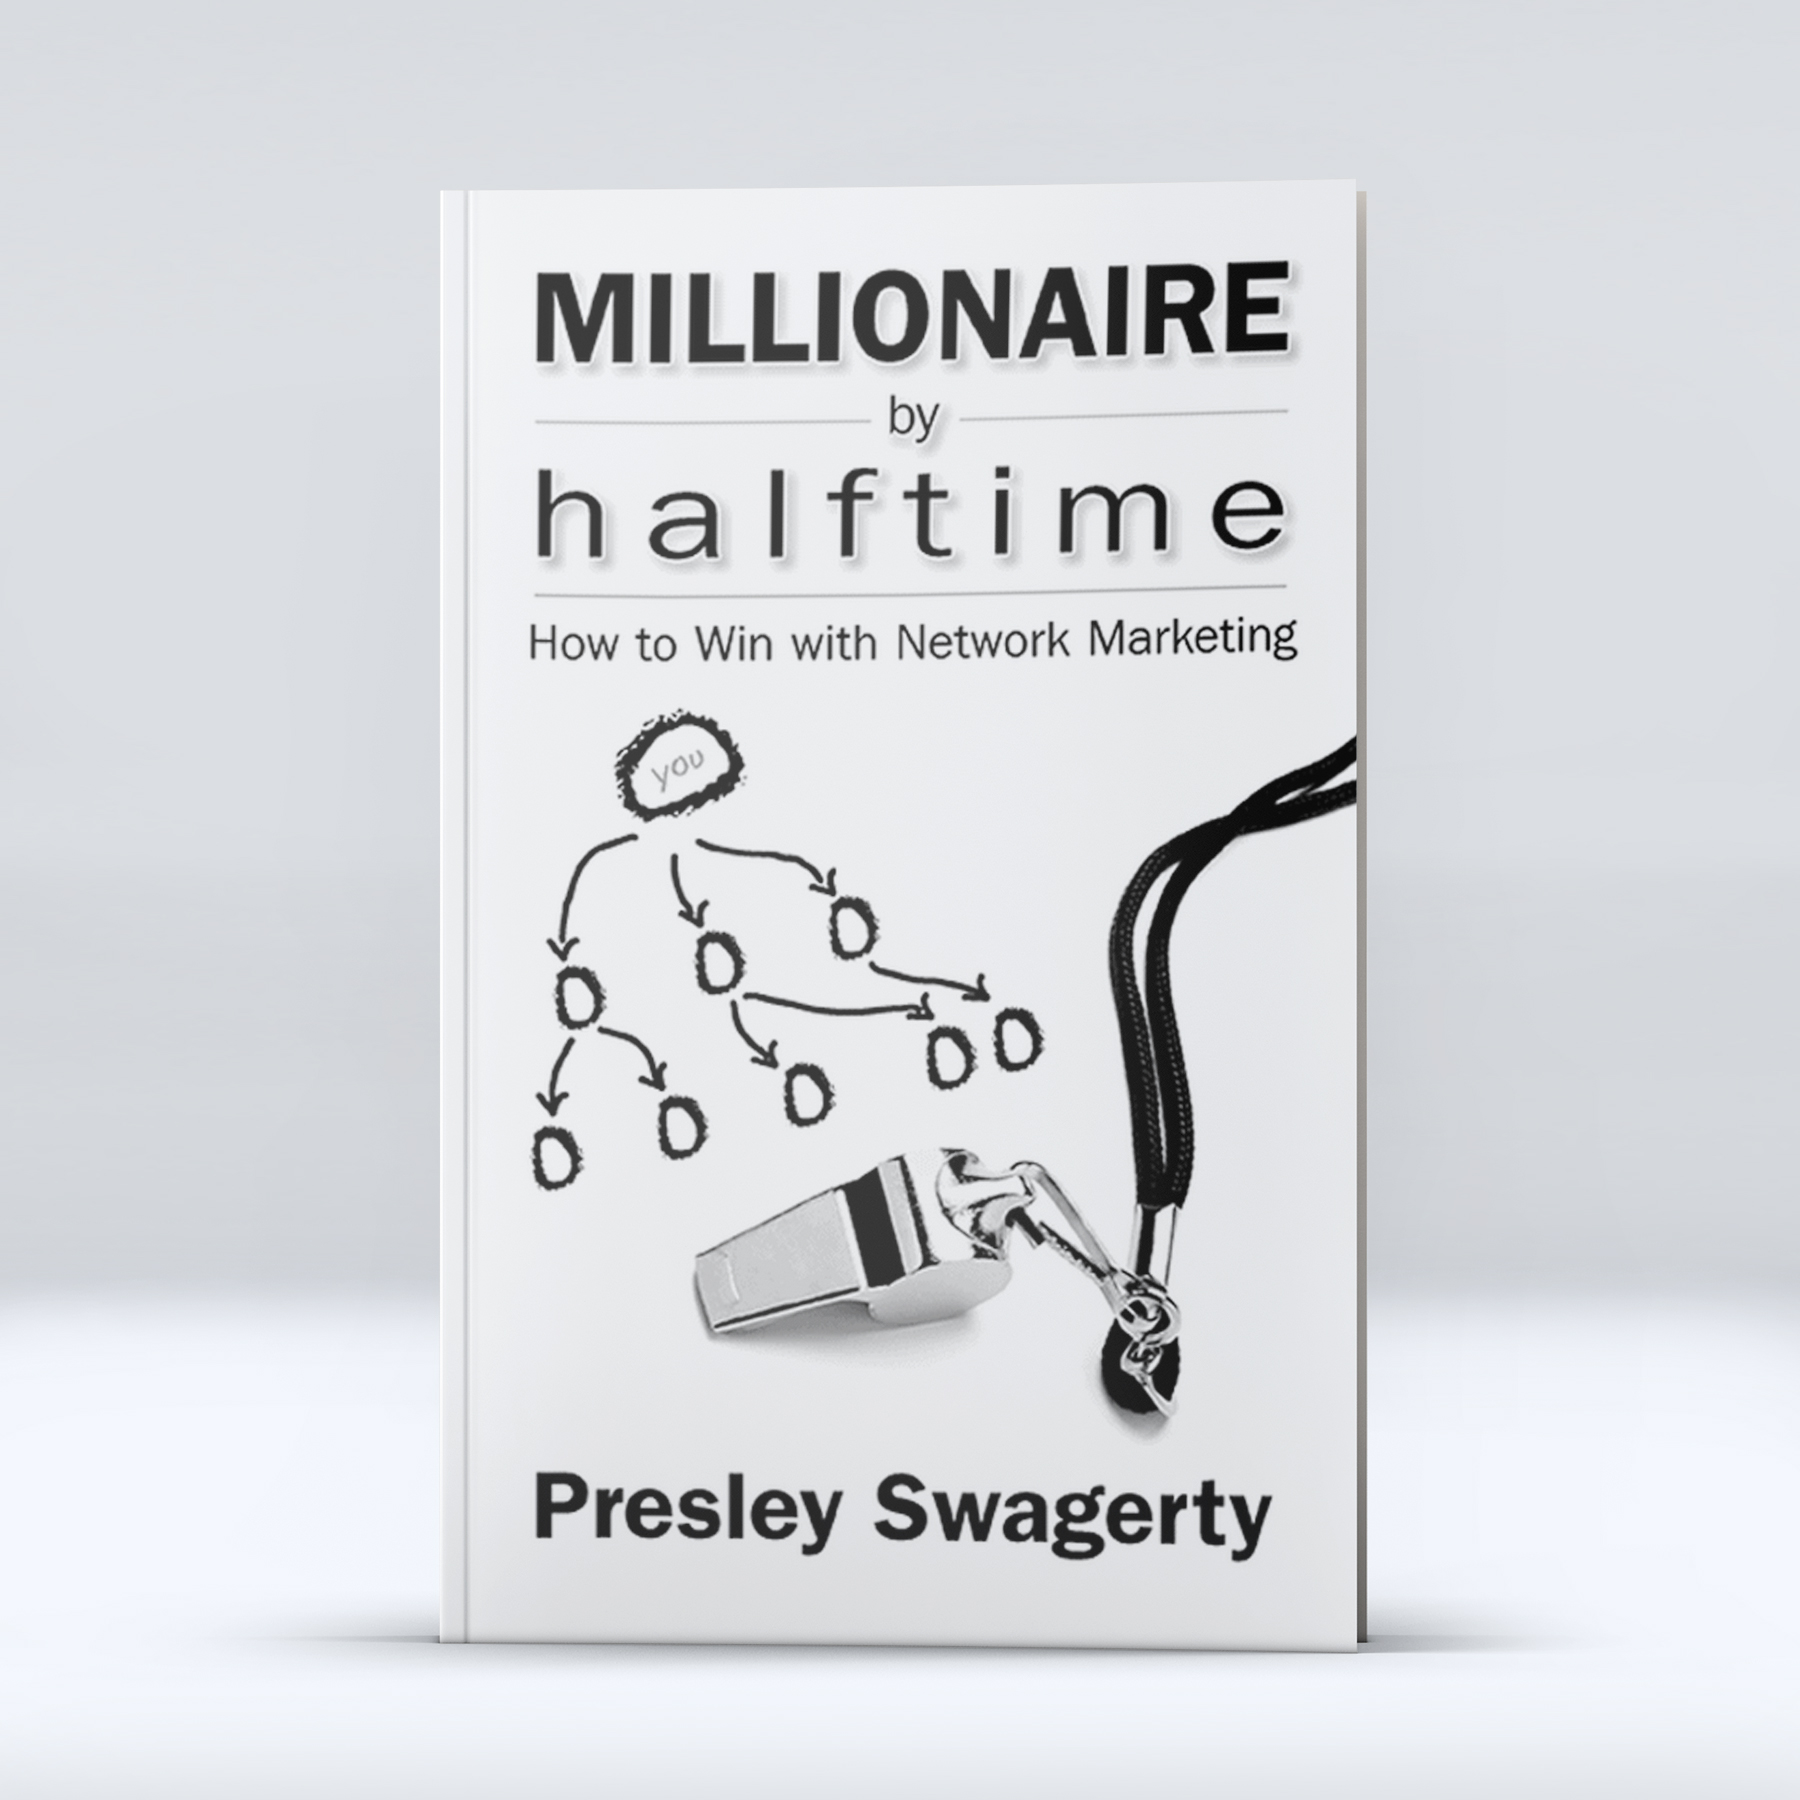 Photo of Millionaire by Halftime book cover by Presley Swagerty